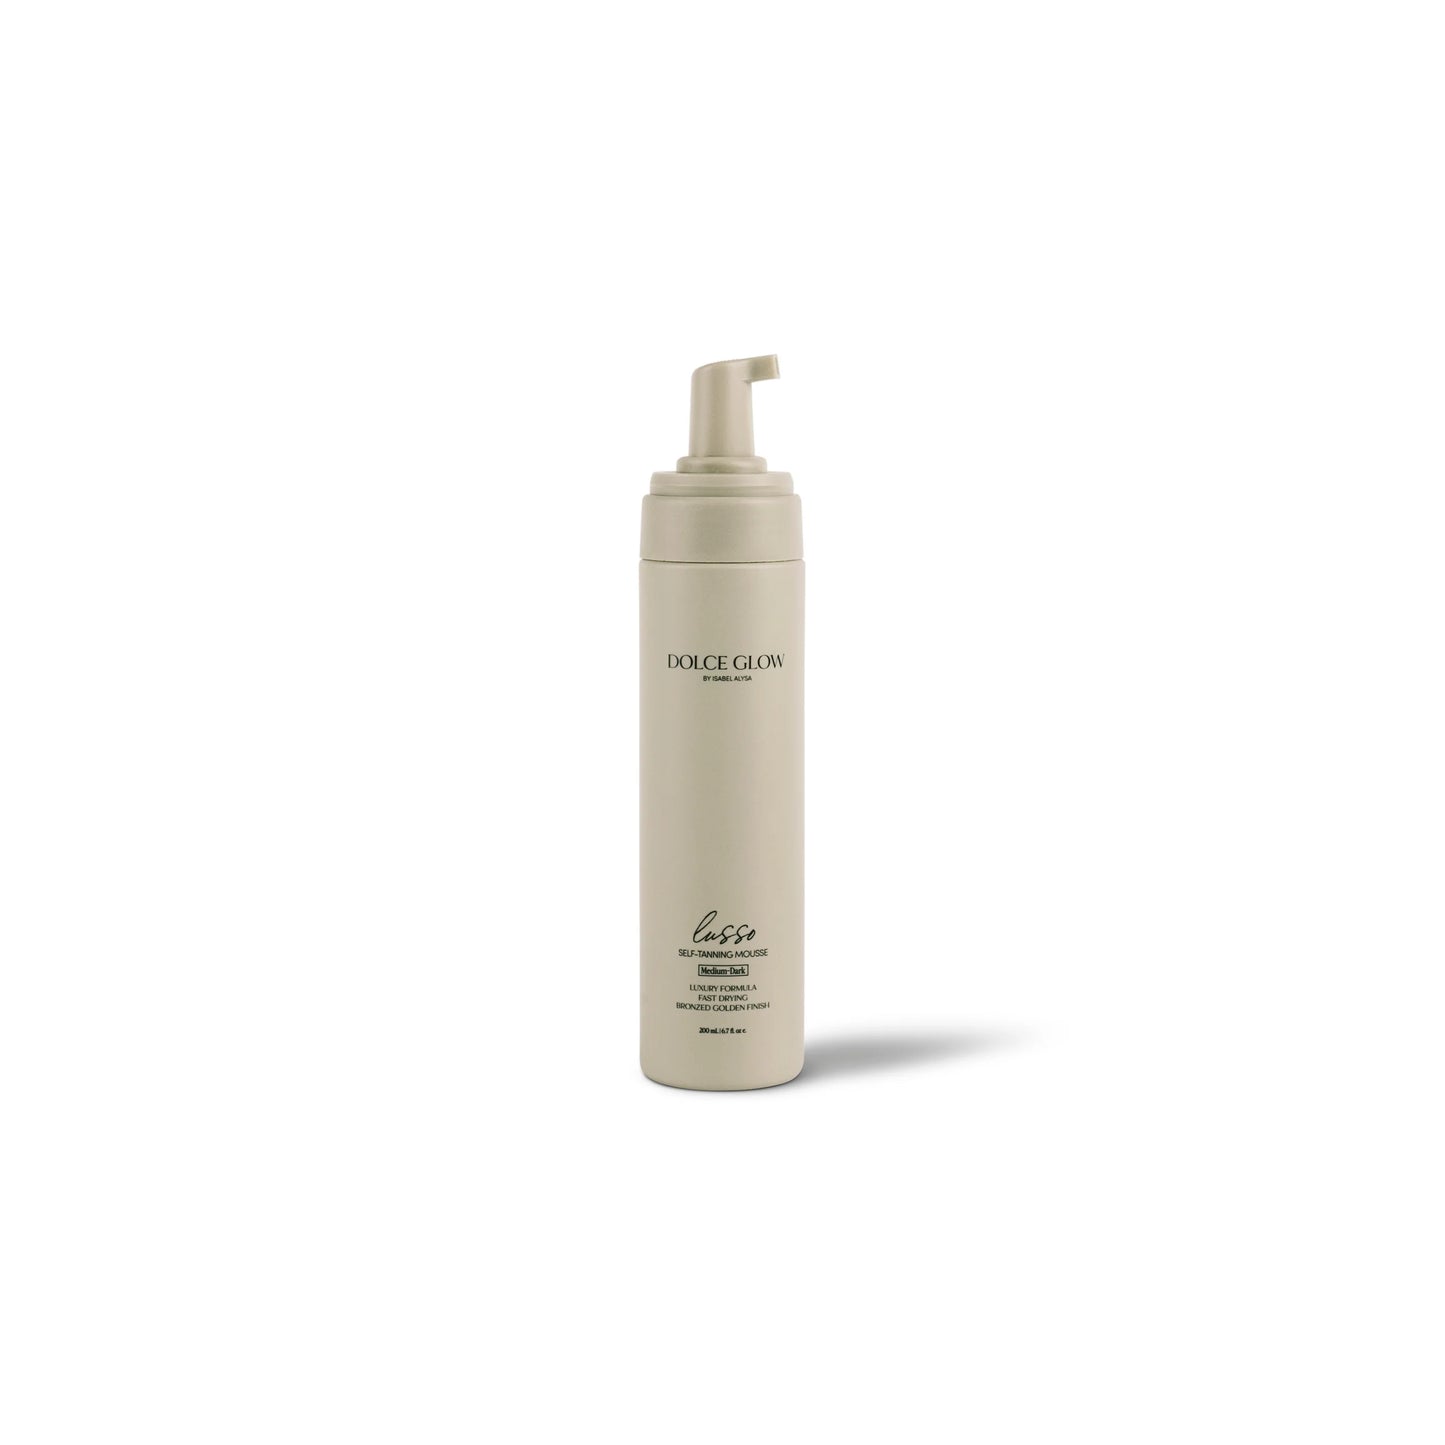 Lusso Self-Tanning Mousse